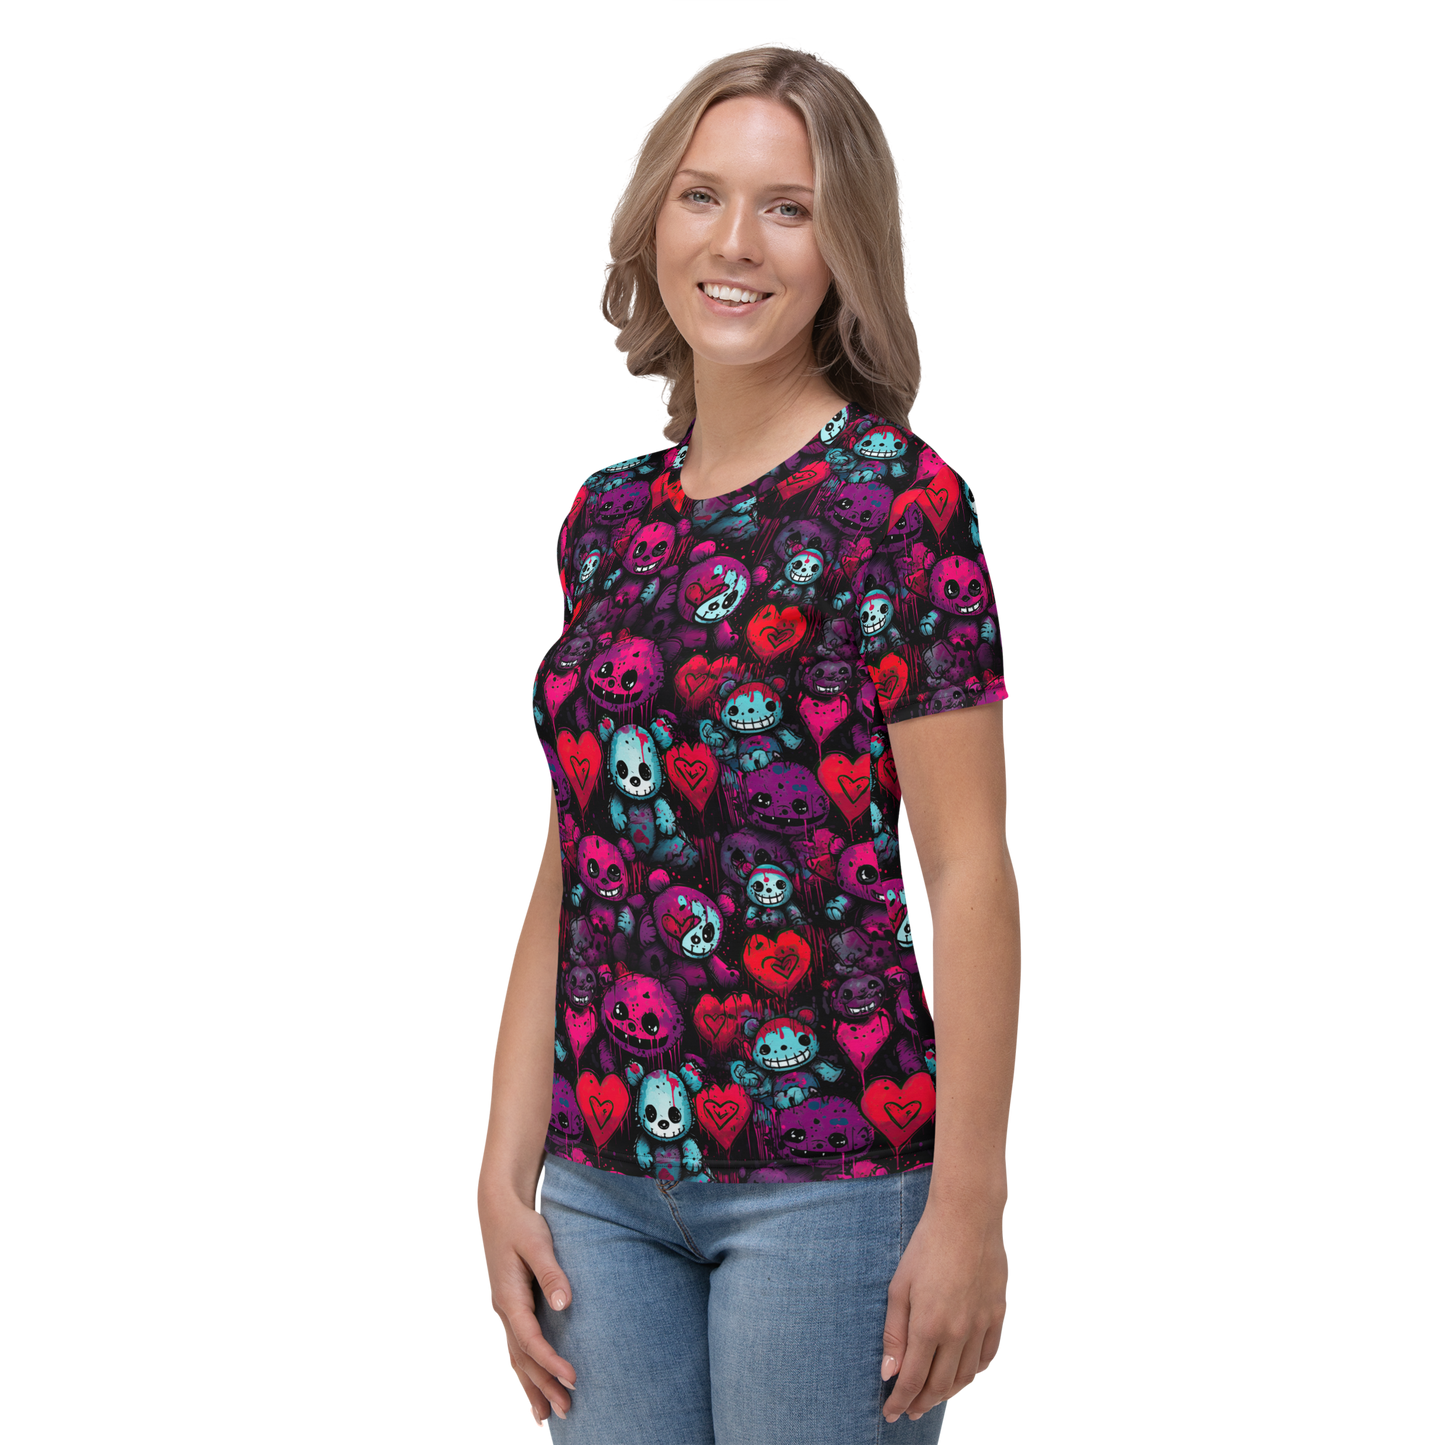 DOWN IN THE WOODS by xDx - WOMENS PJ SHIRT